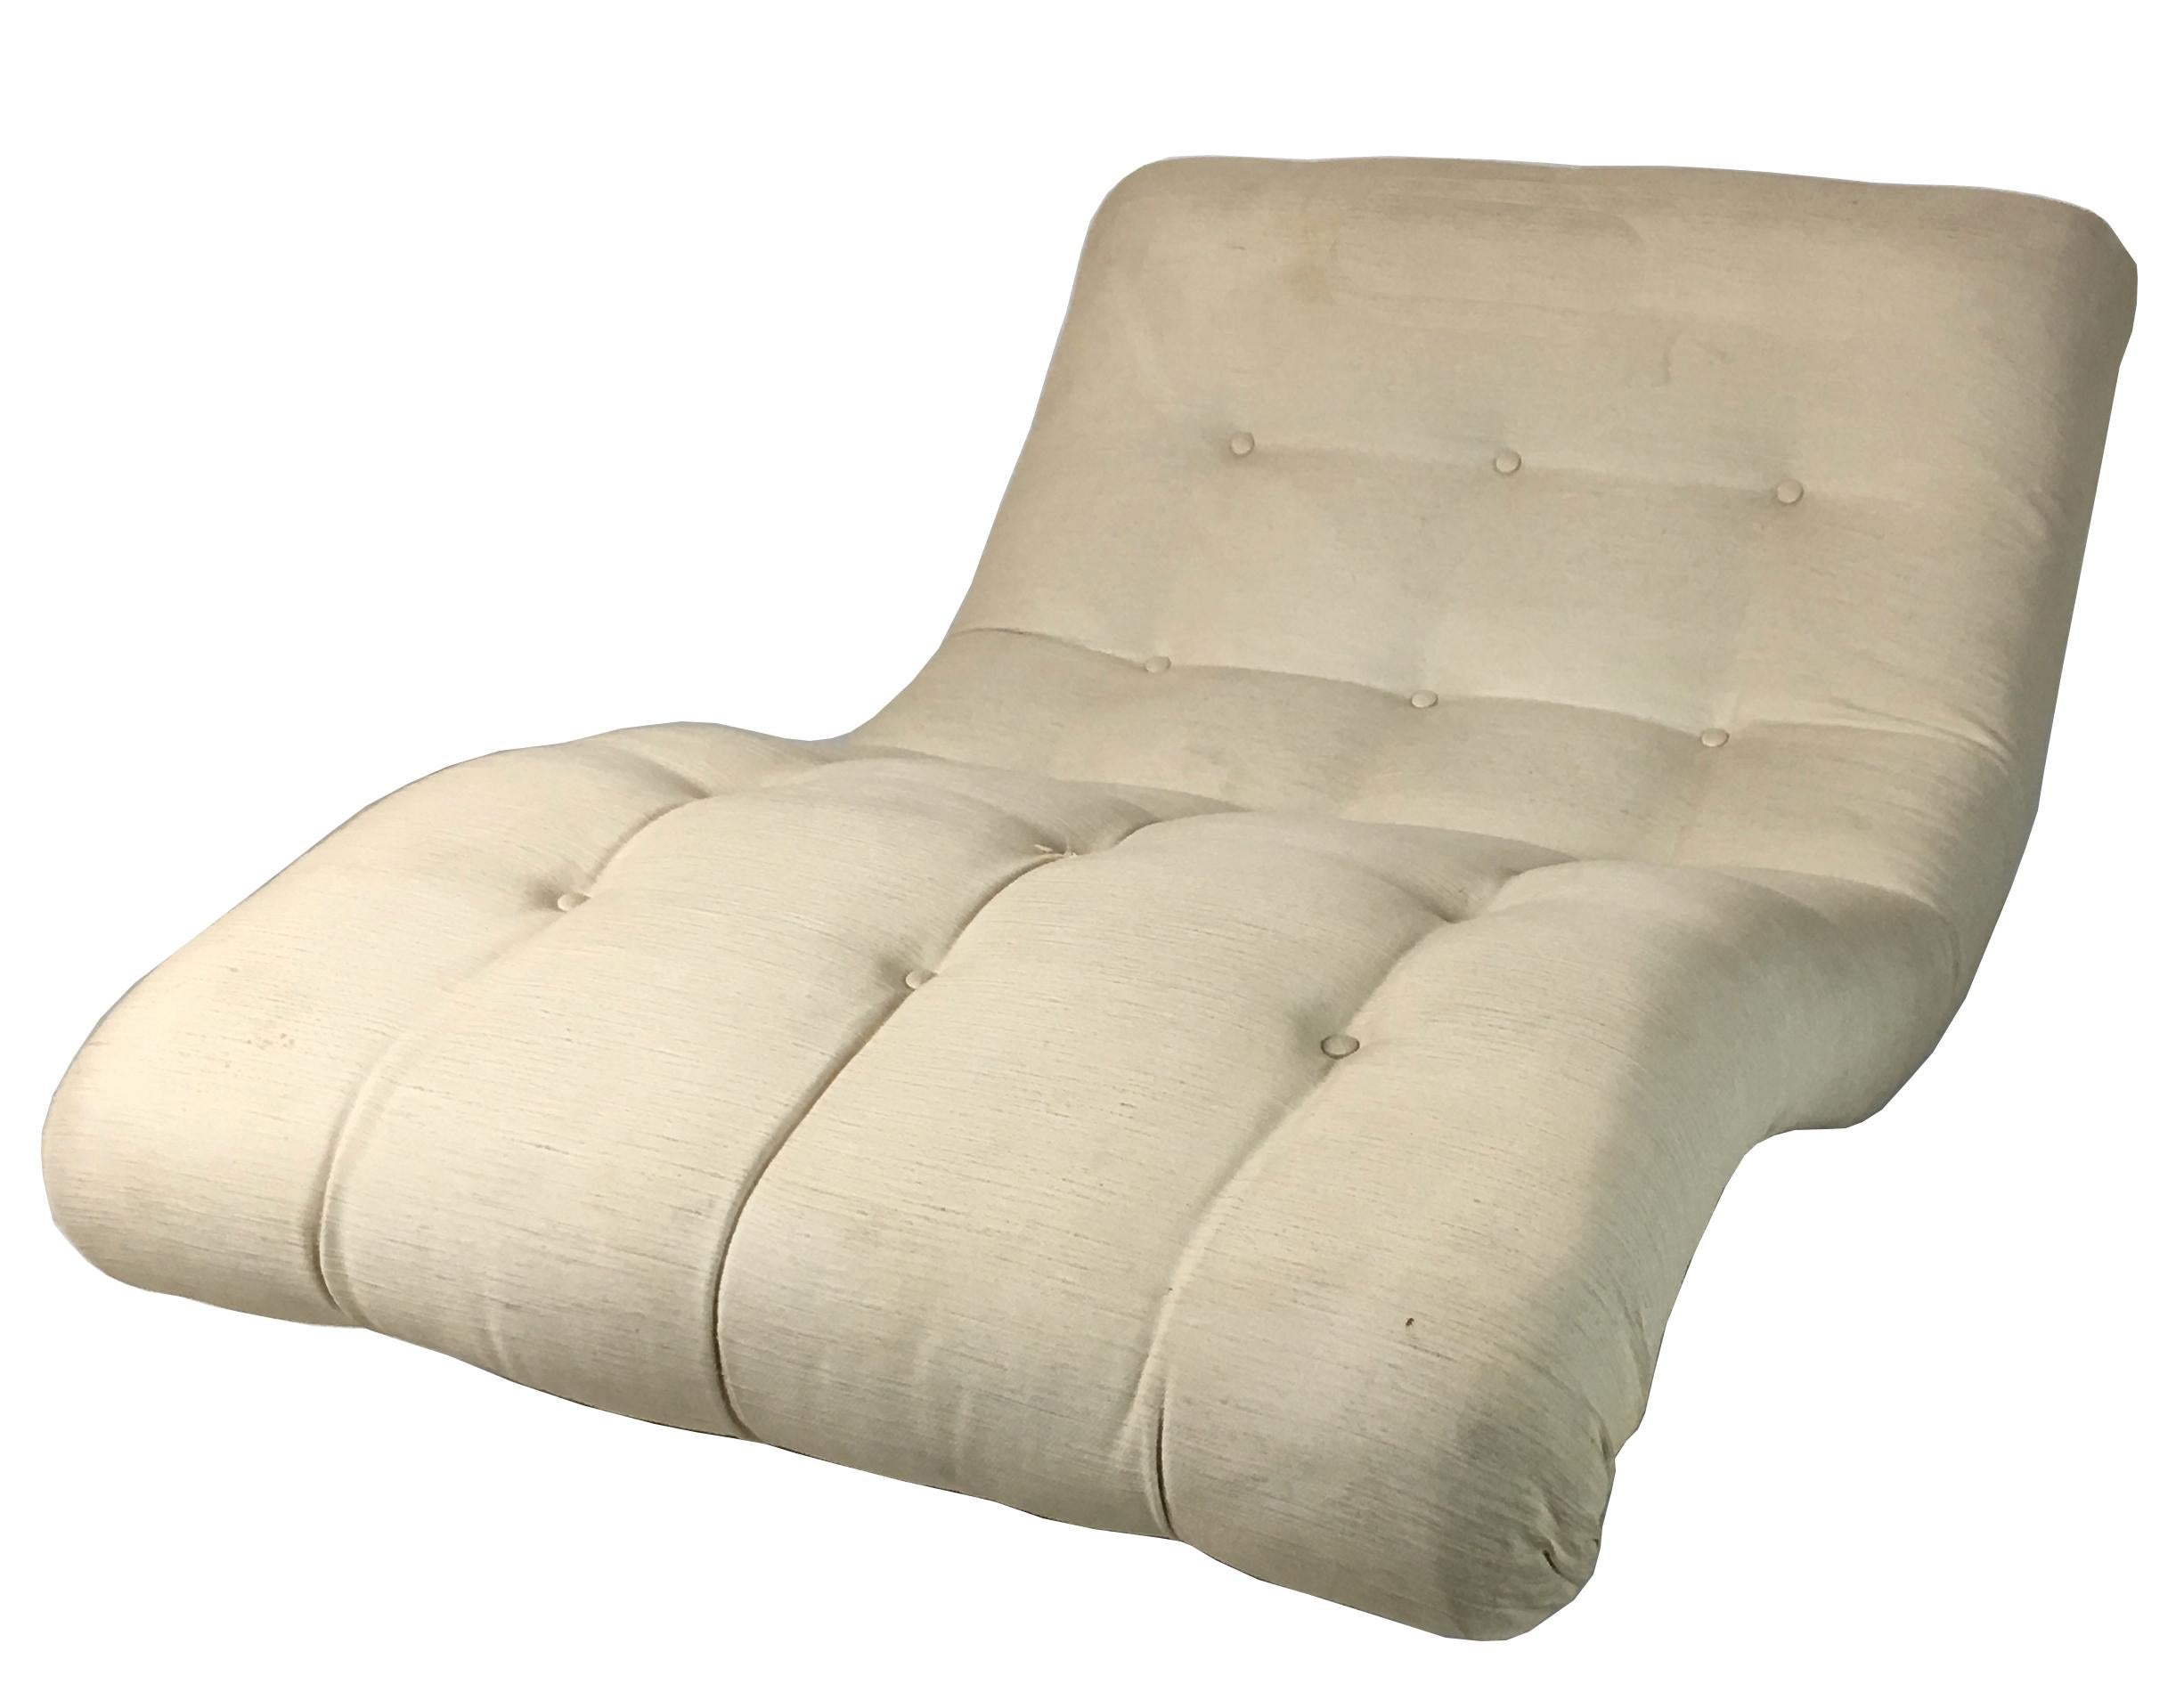 American Contour Chaise Longue by Adrian Pearsall for Craft Associates